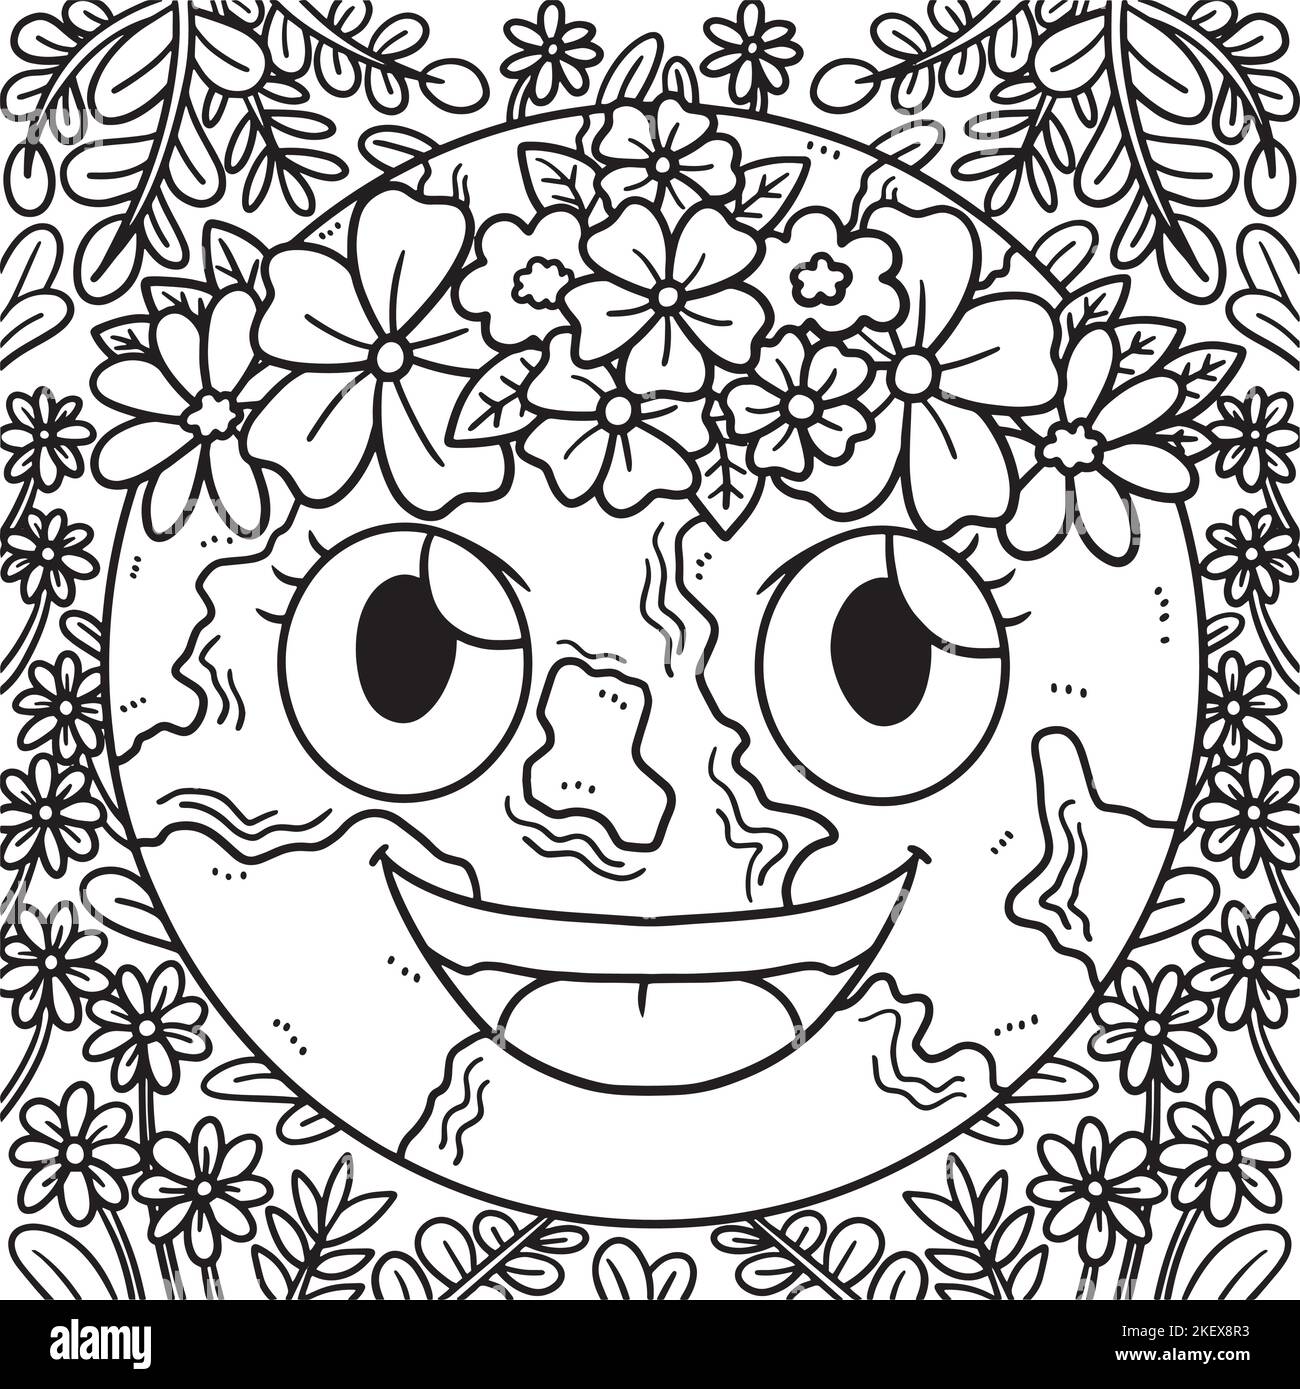 Earth Day with Flower Crown Coloring Page Stock Vector